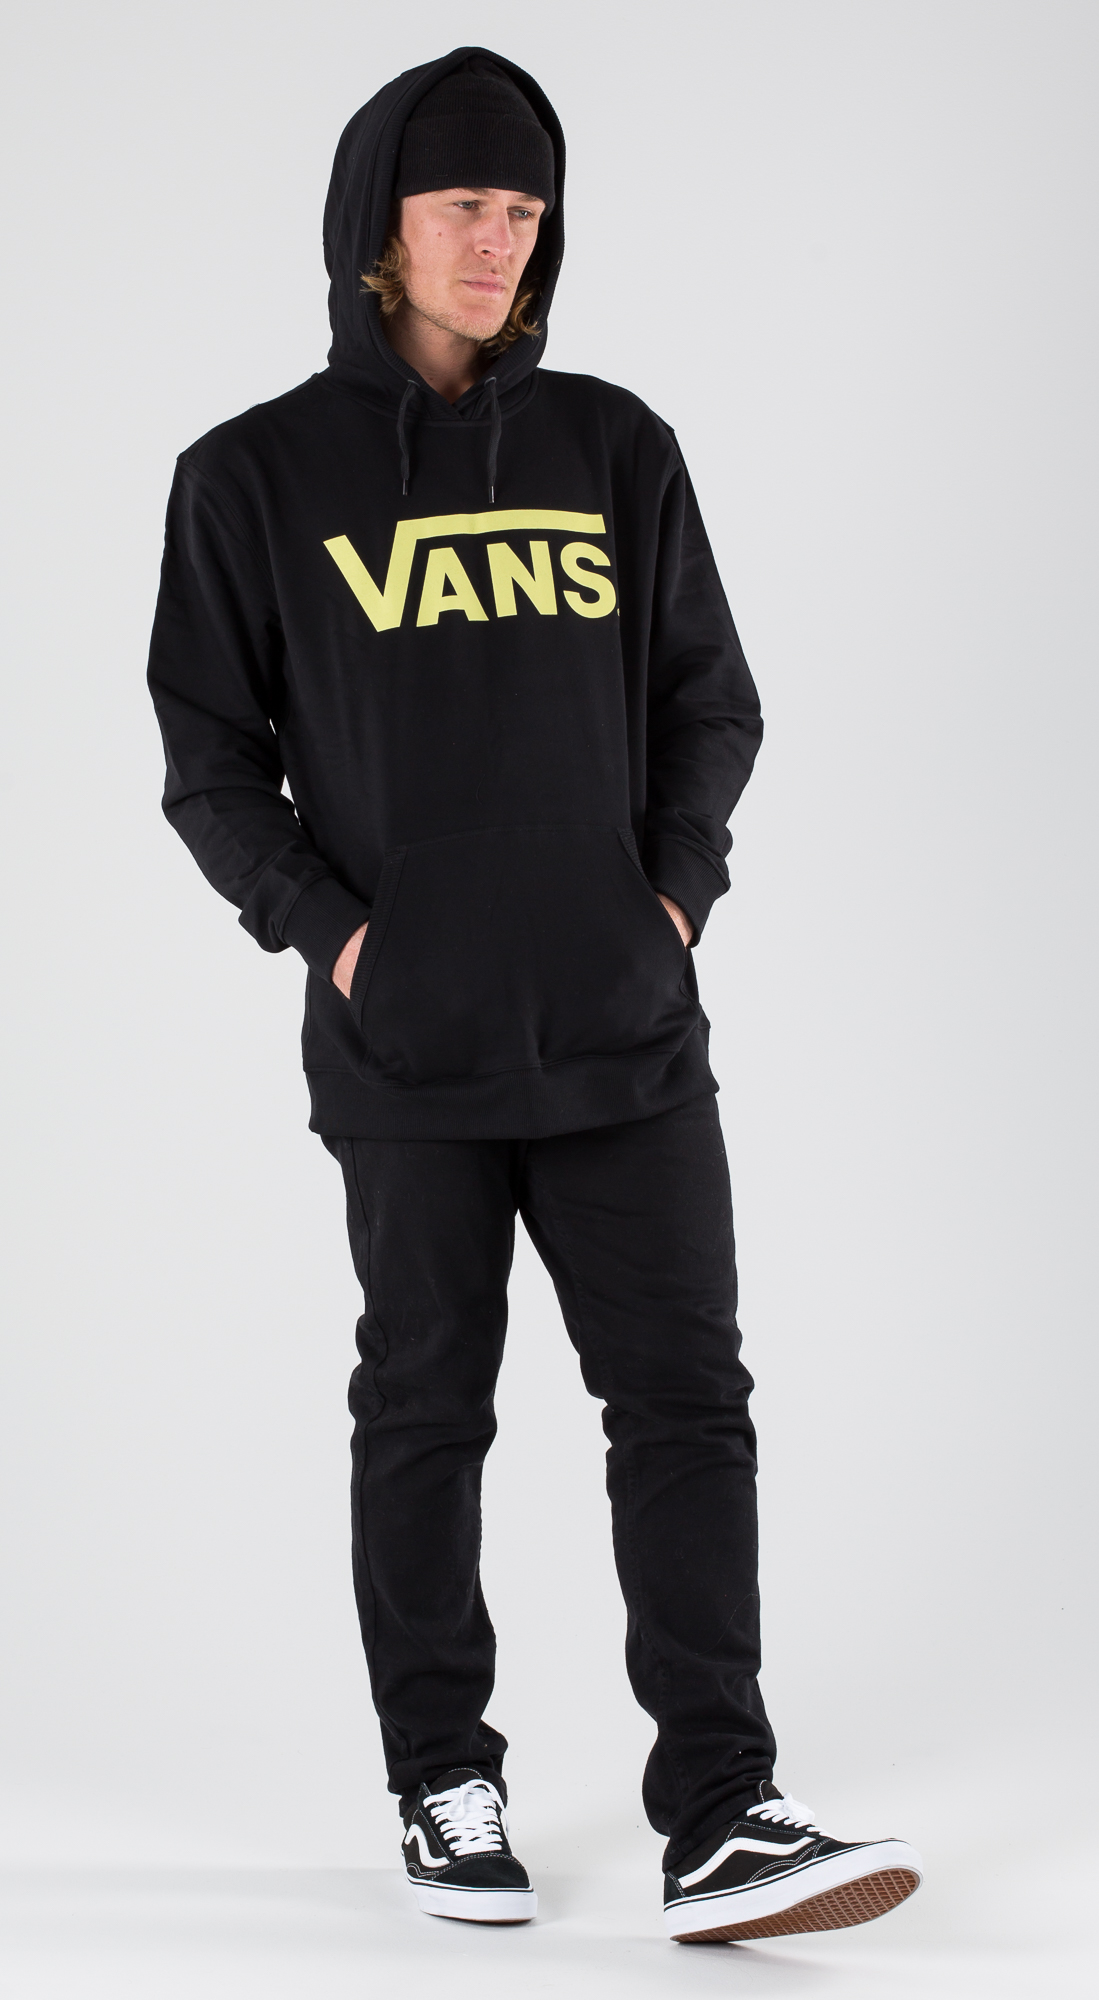 classic vans outfit